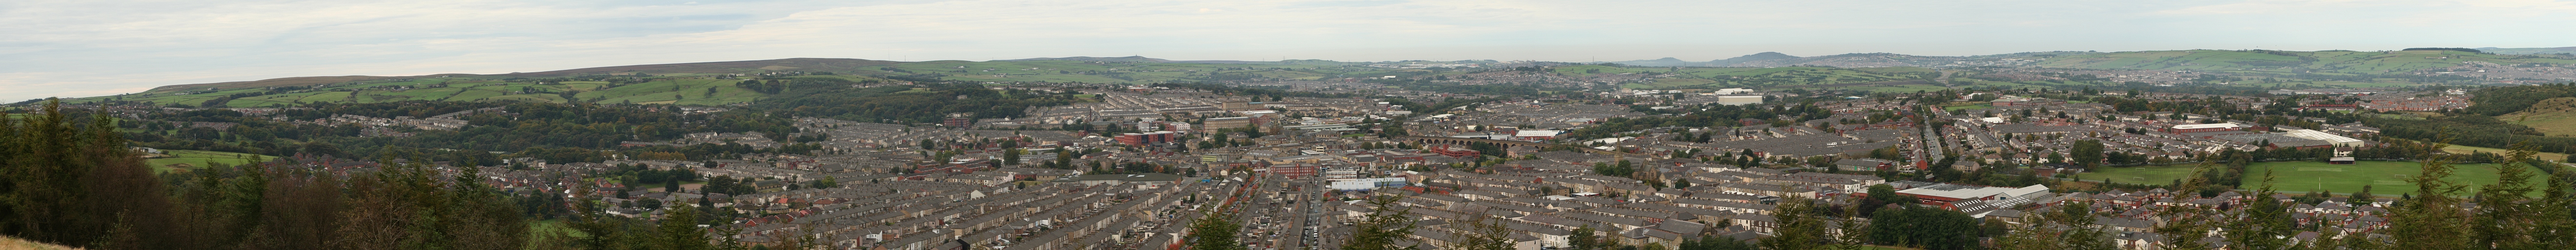 Panorama of Accrington, Lancashire from the Hillock Vale